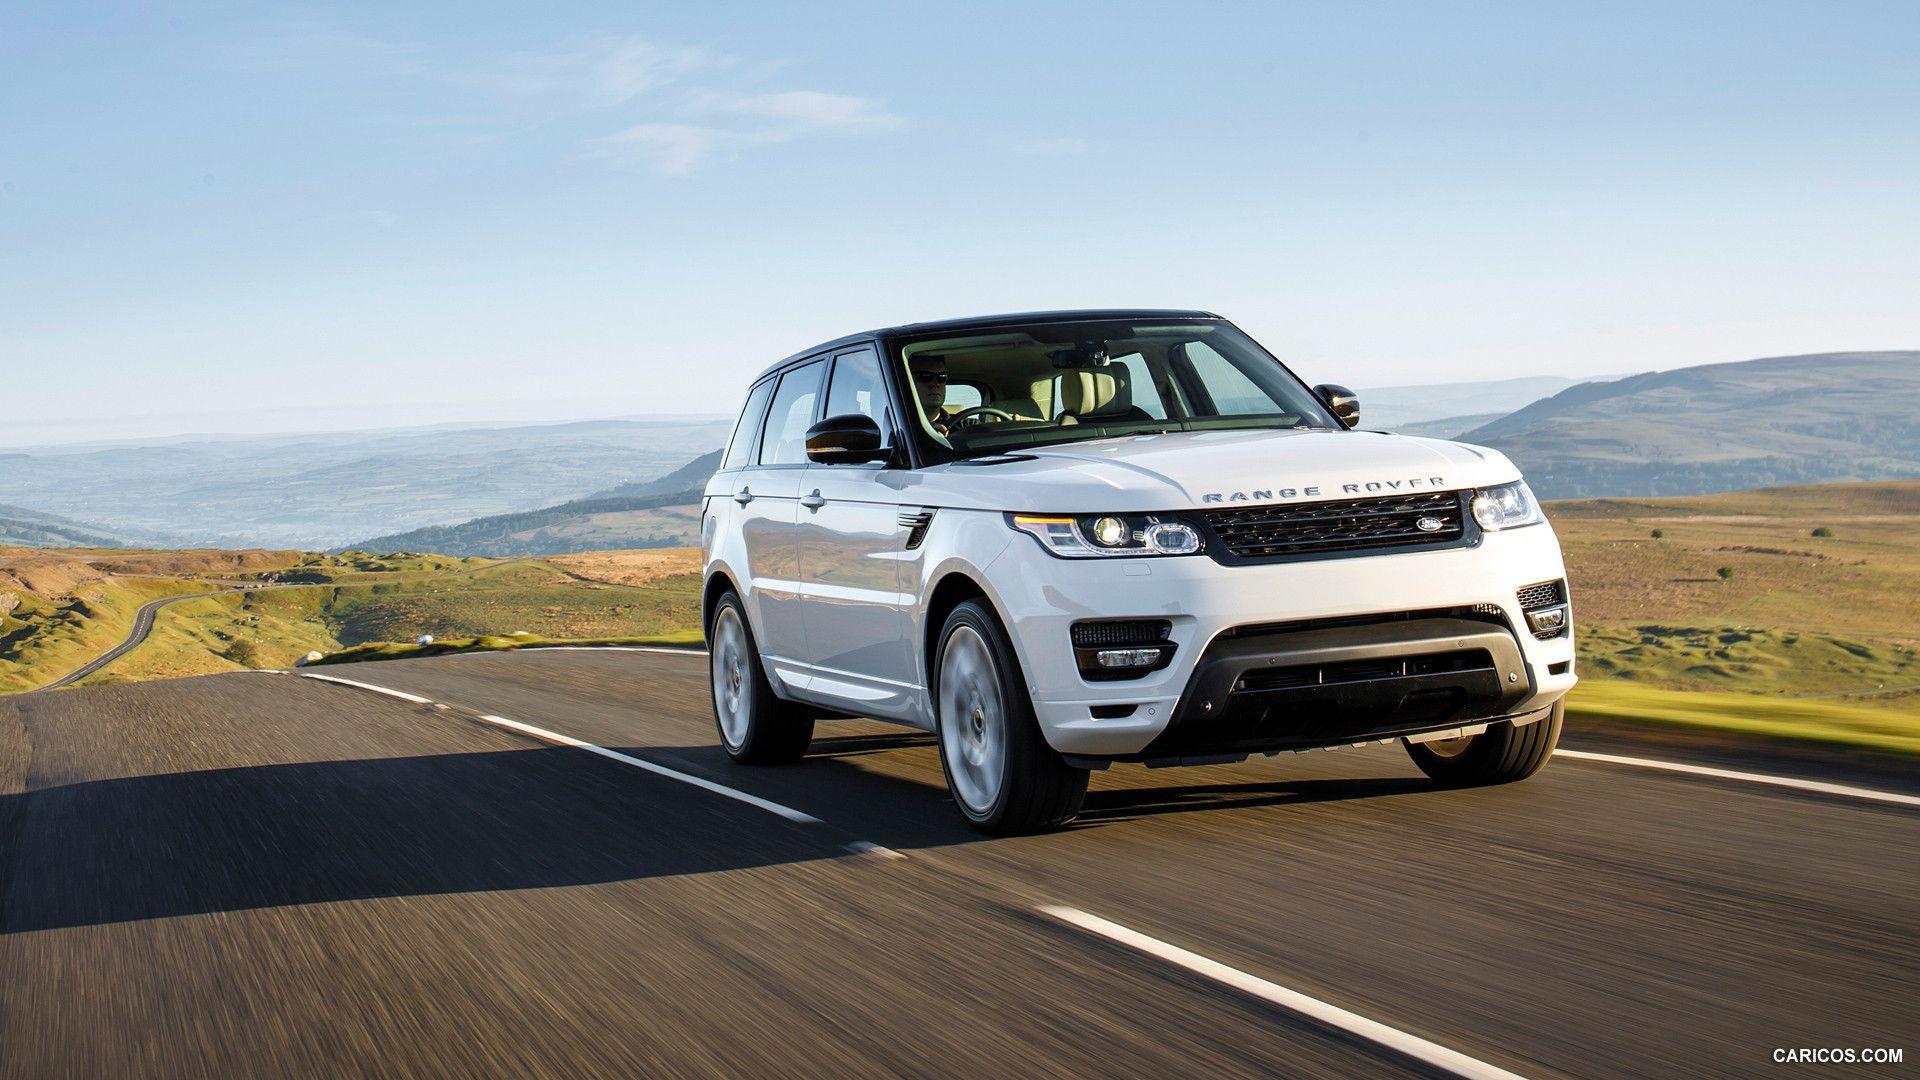 Range Rover 2014 Whit HD Wallpaper, Background Image